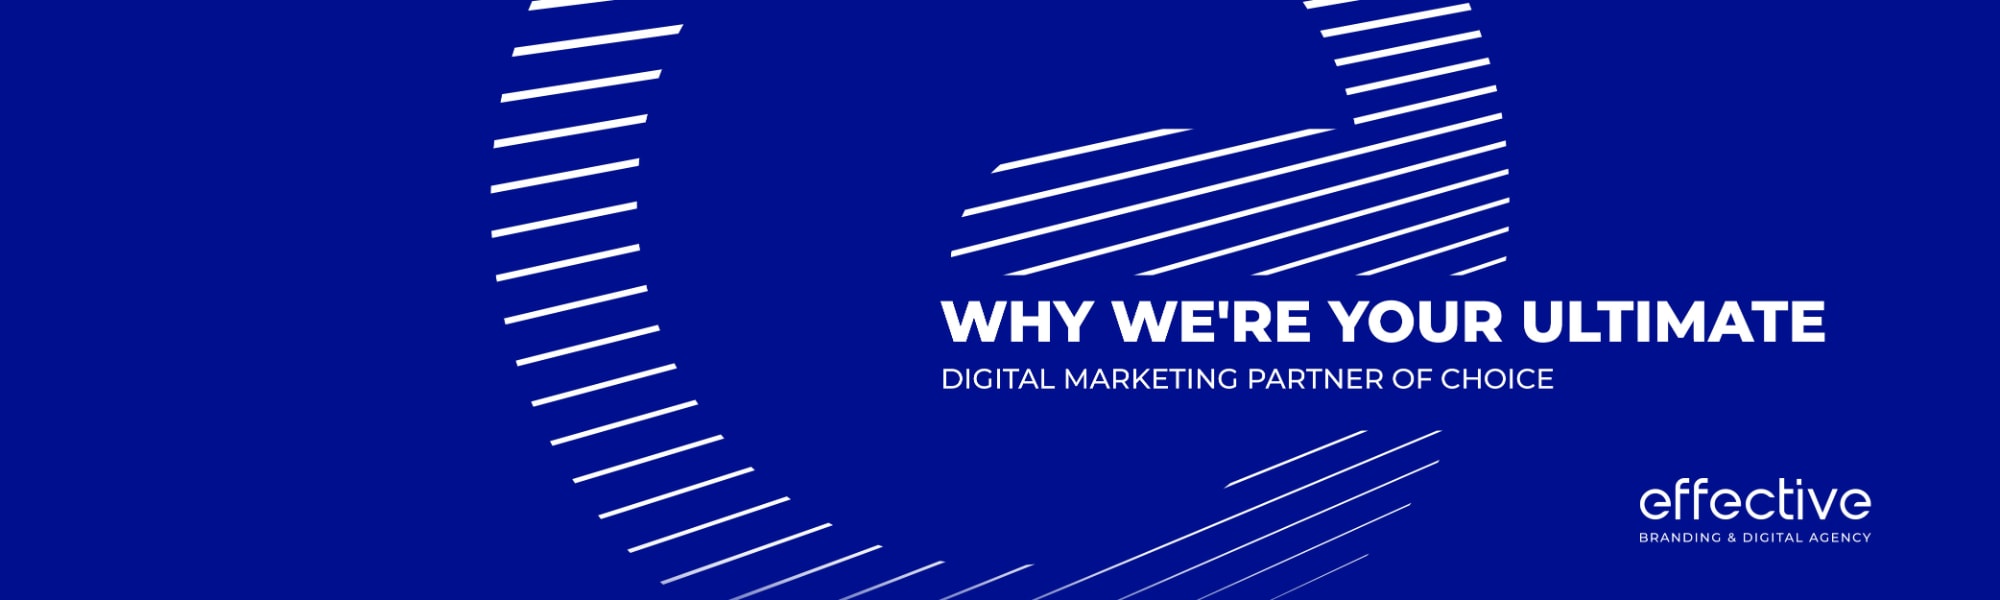 Why We are Your Ultimate Digital Marketing Partner of Choice